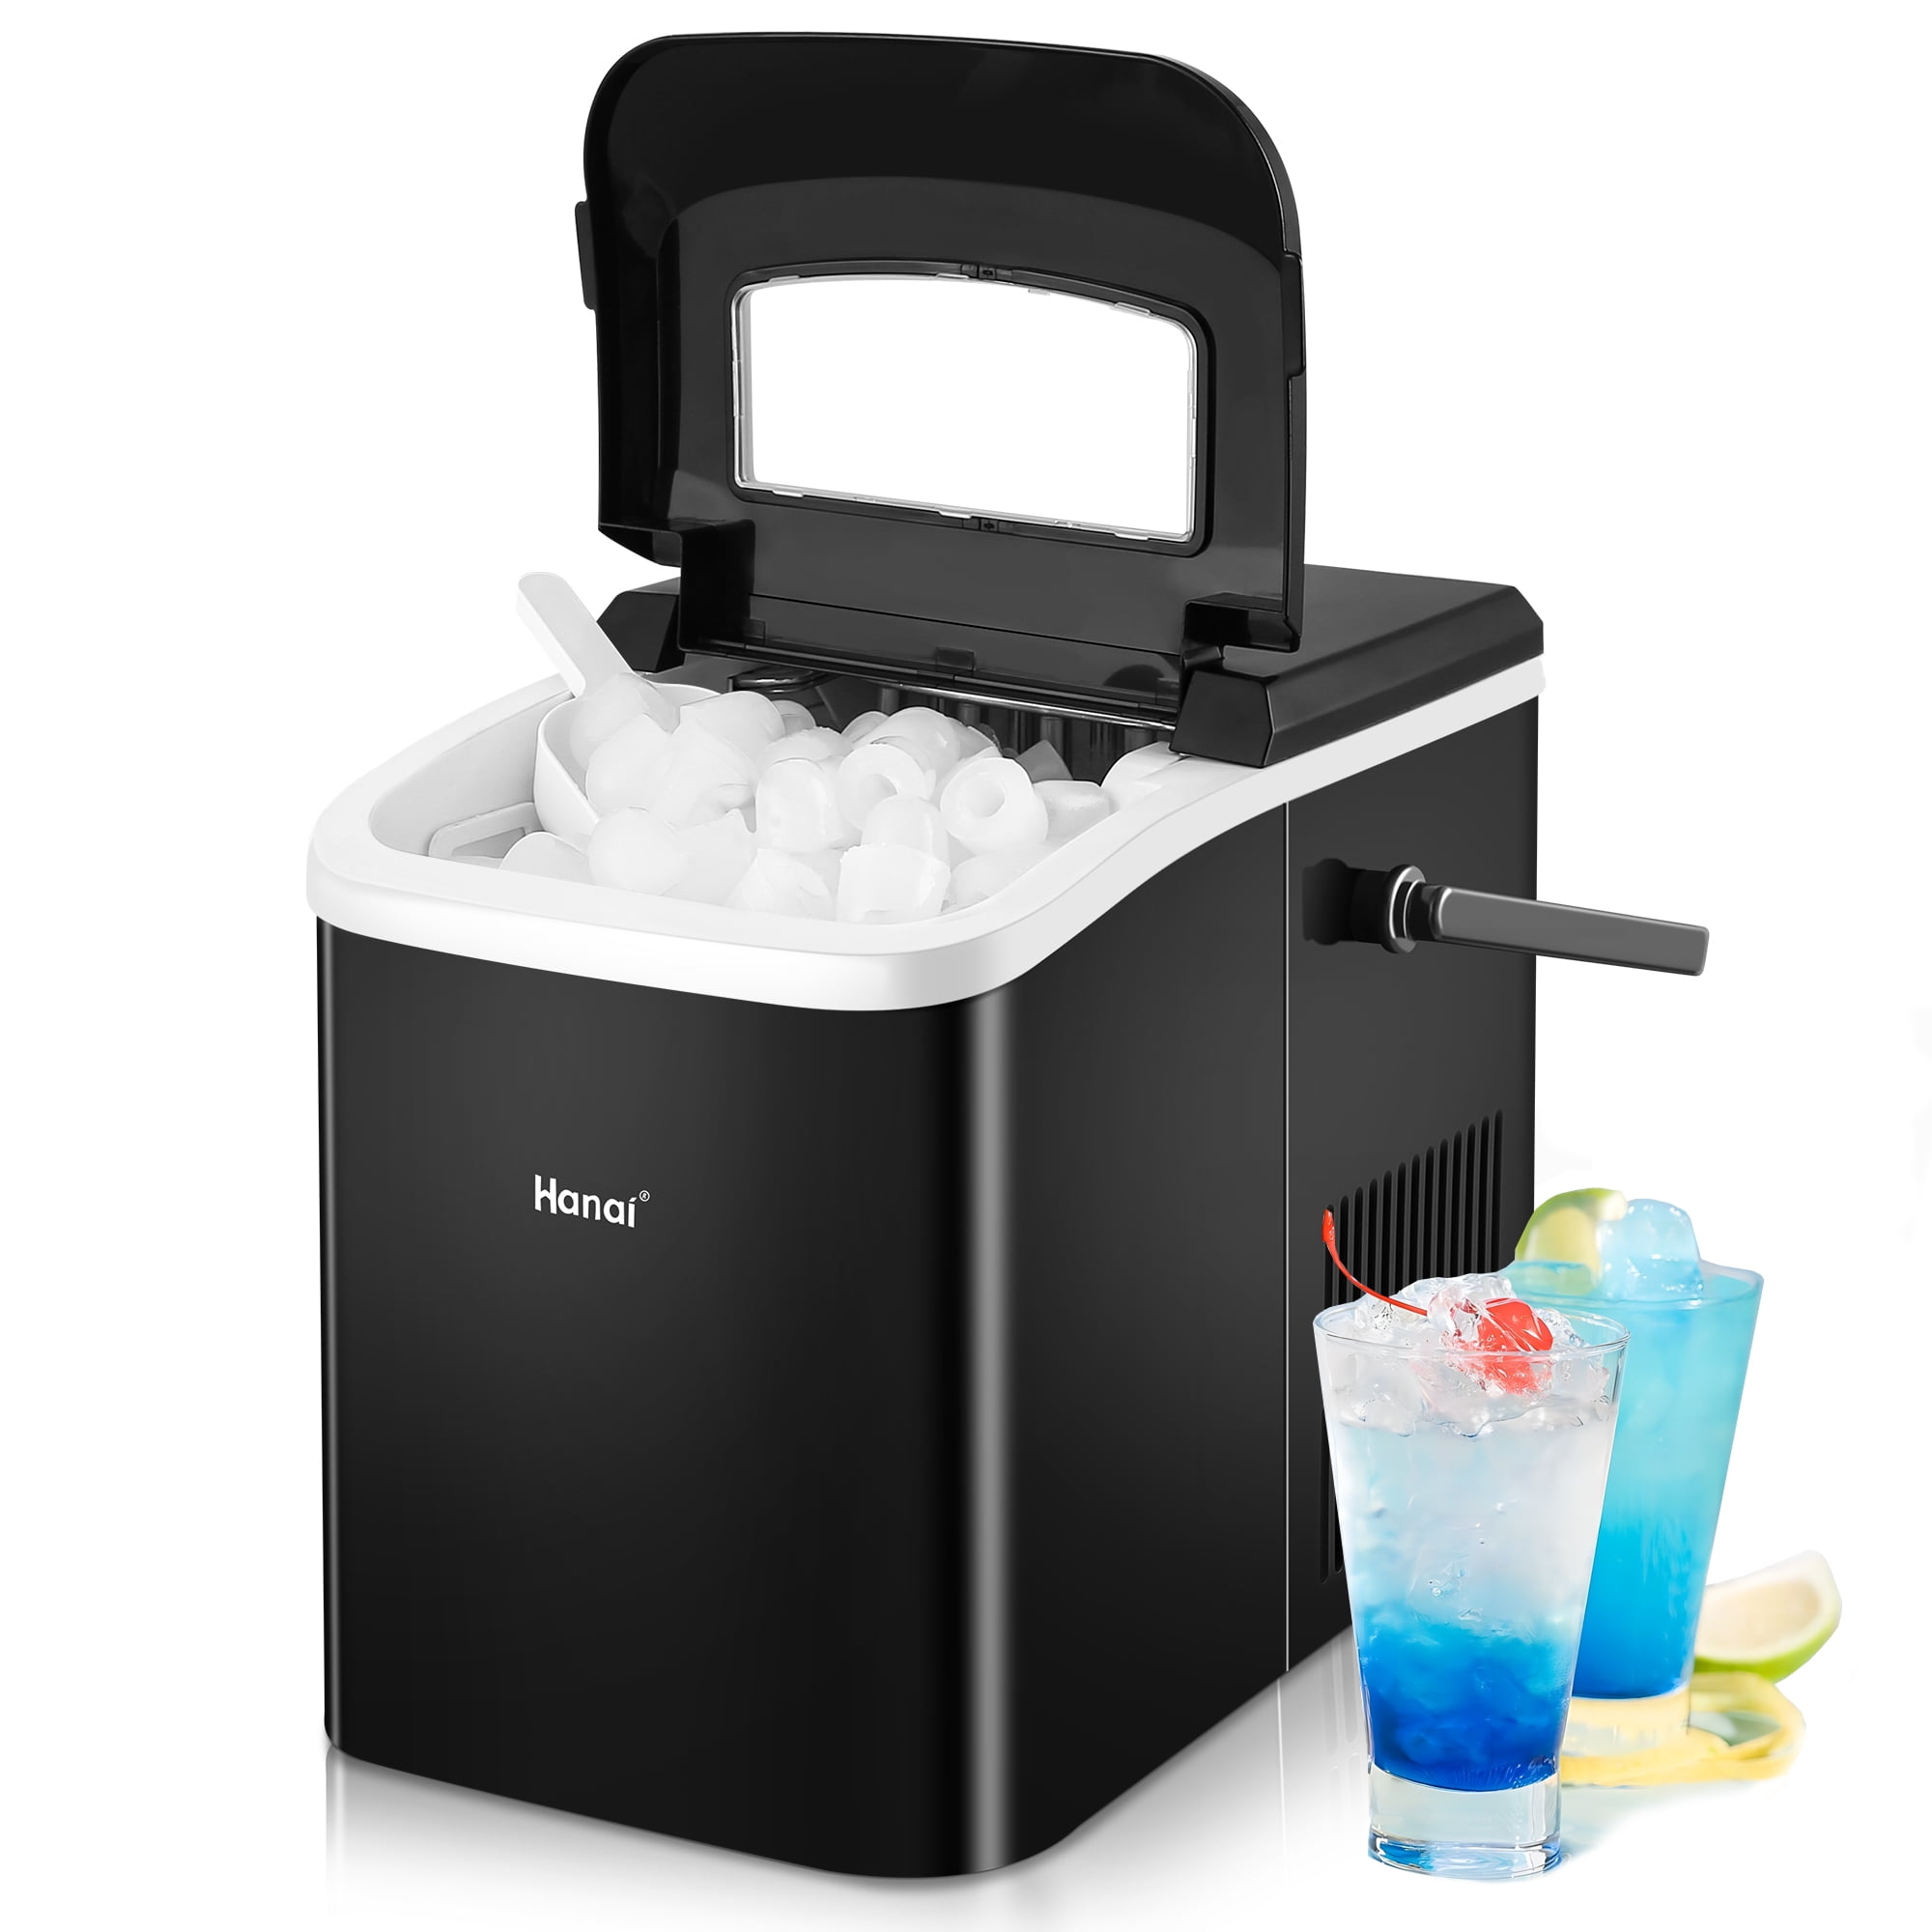 SYCEES Nugget Ice Maker Countertop, 55lbs/24h, 13lbs Storage, Sonic Ice  Ready in 7 Mins, 2 Ways to Add Water, Self-Cleaning Pellet Ice Machine for